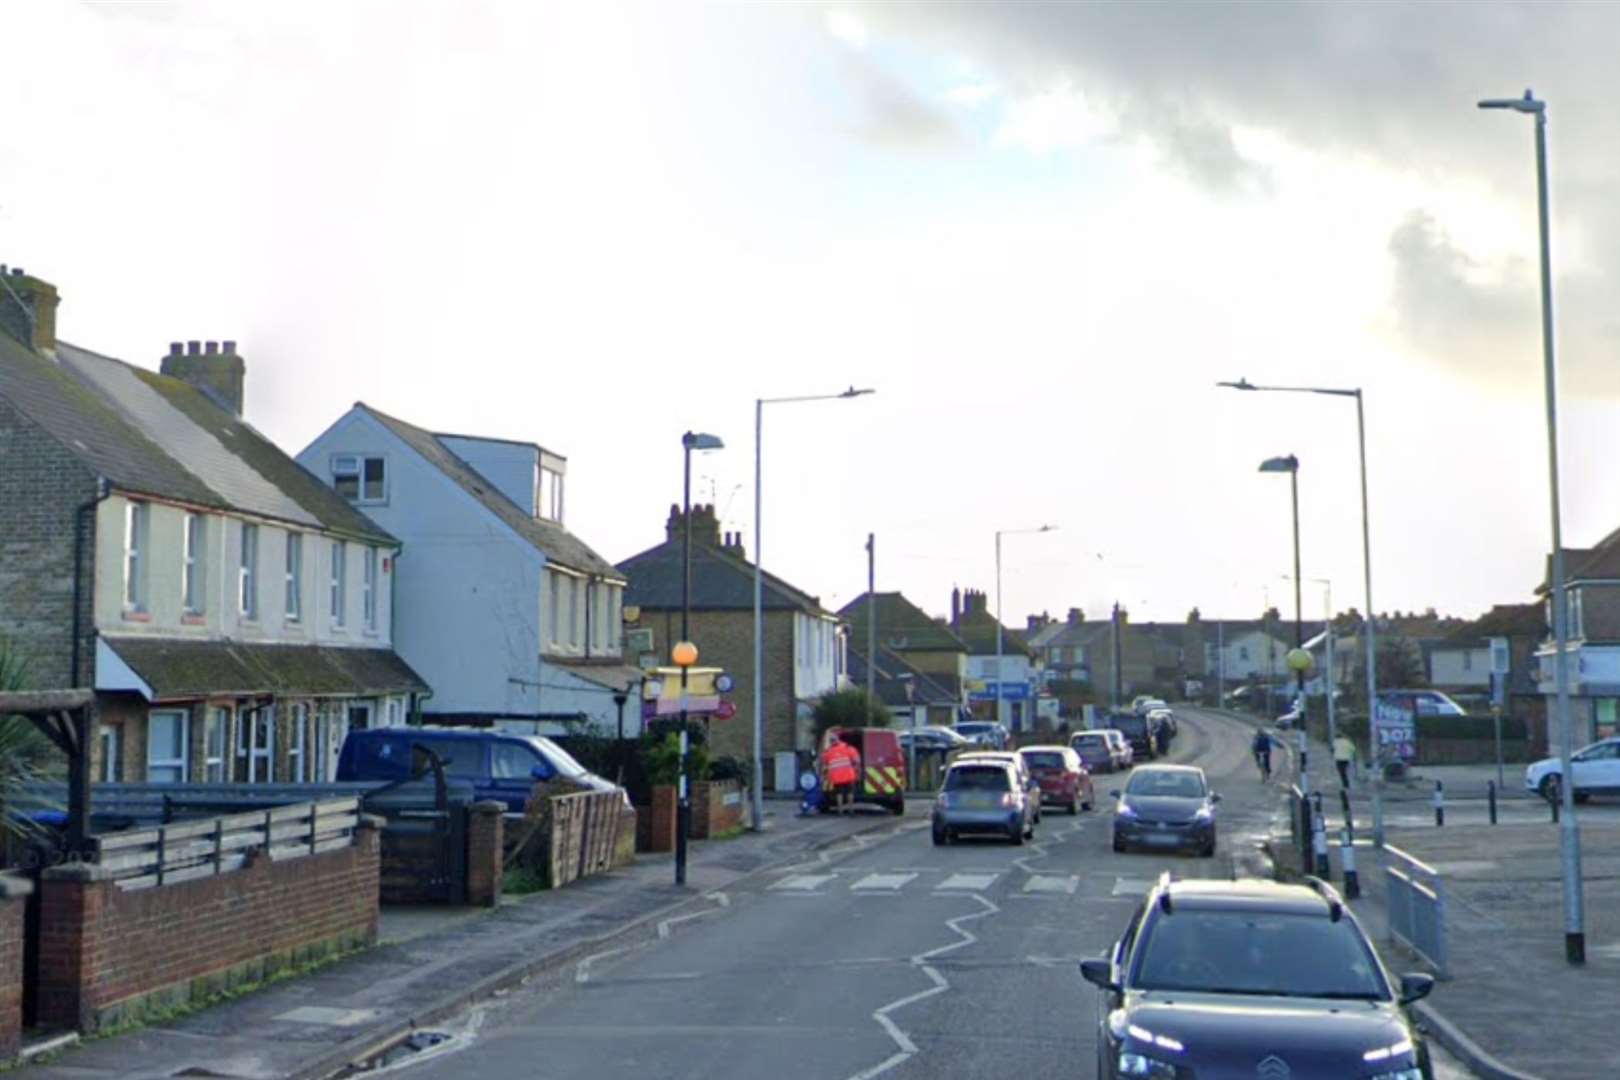 A victim to a robbery was held at knife point to give up their e-scooter in an alleyway in Newington Road, Ramsgate. Photo: Google